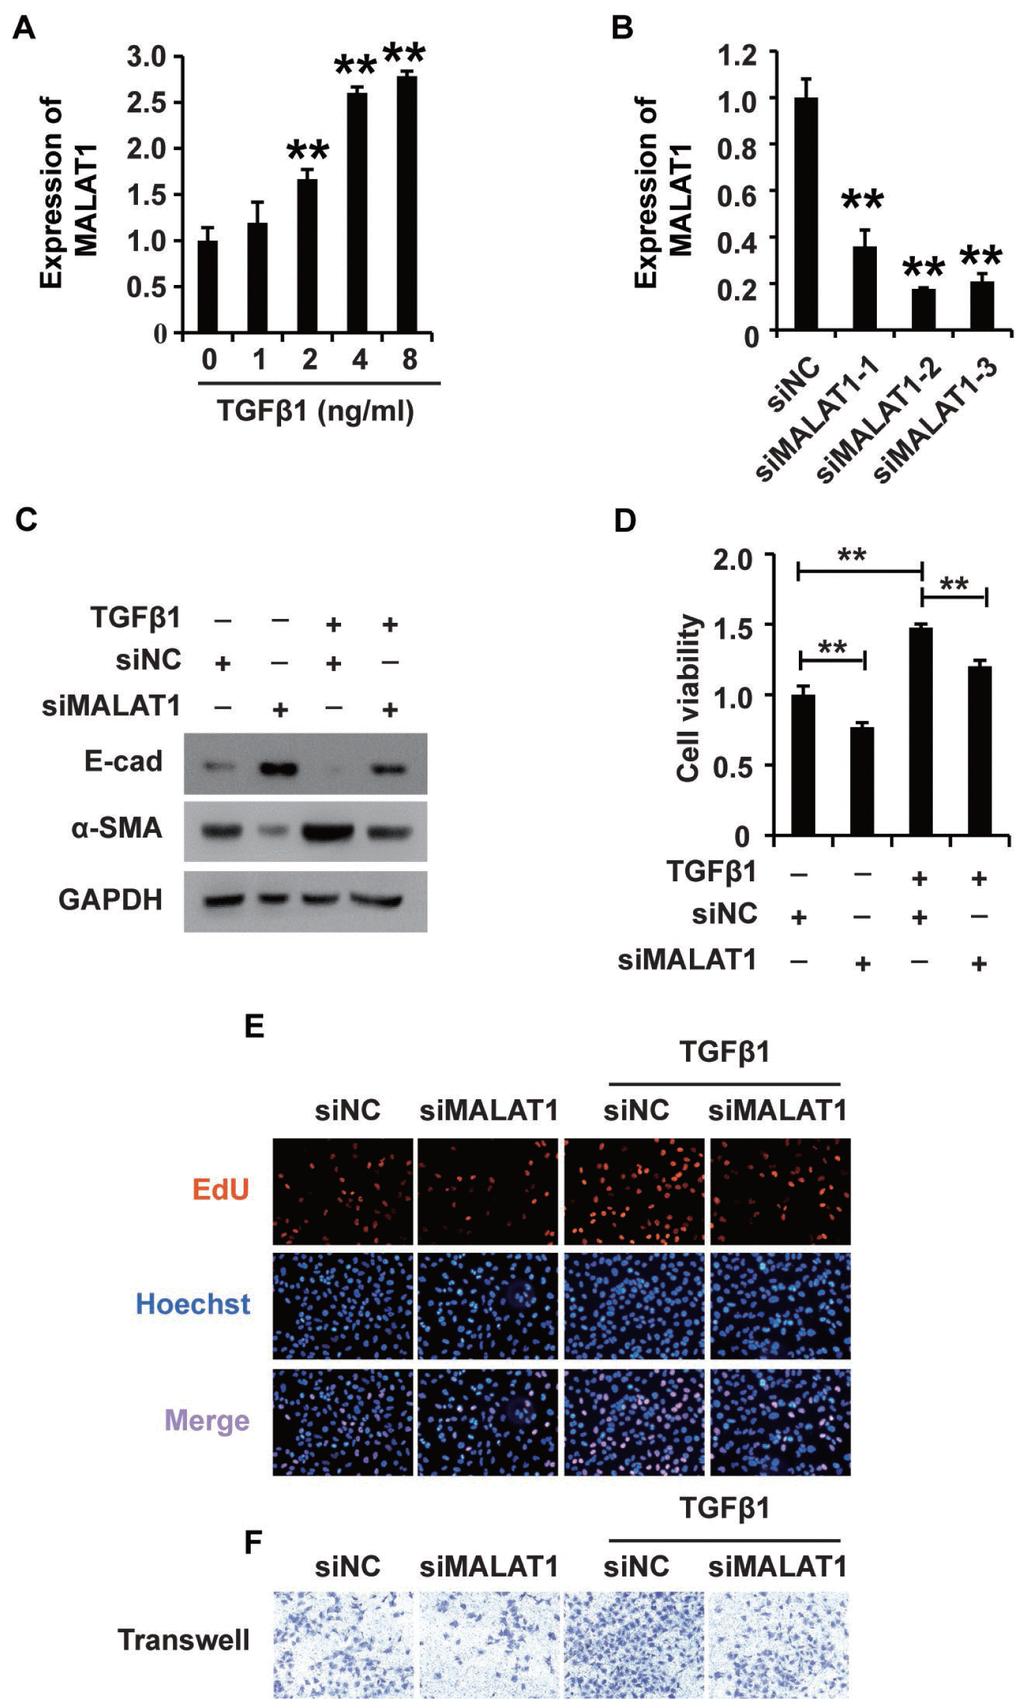 TGF-β1 induces fibrosis via upregulating MALAT1 expression in HK2 cells. (A) qRT-PCR analysis of MALAT1 expression in HK2 cells treated with TGF-β1. (B) qRT-PCR analysis of MALAT1 expression in HK2 cells transfected with siMALAT1 or siNC for approximately 48 h. (C) Western blot analyses of E-cad, α-SMA and GAPDH expression in HK2 cells receiving different treatments. (D–F) CCK8, EdU and cell migration analyses of the viability, proliferation and migration of HK2 cells receiving different treatments. After pretransfection with siMALAT1 or siNC for 24 h, HK2 cells were treated with 4 ng/mL TGF-β1 for another 48 h. GAPDH was used as a control. *P P 